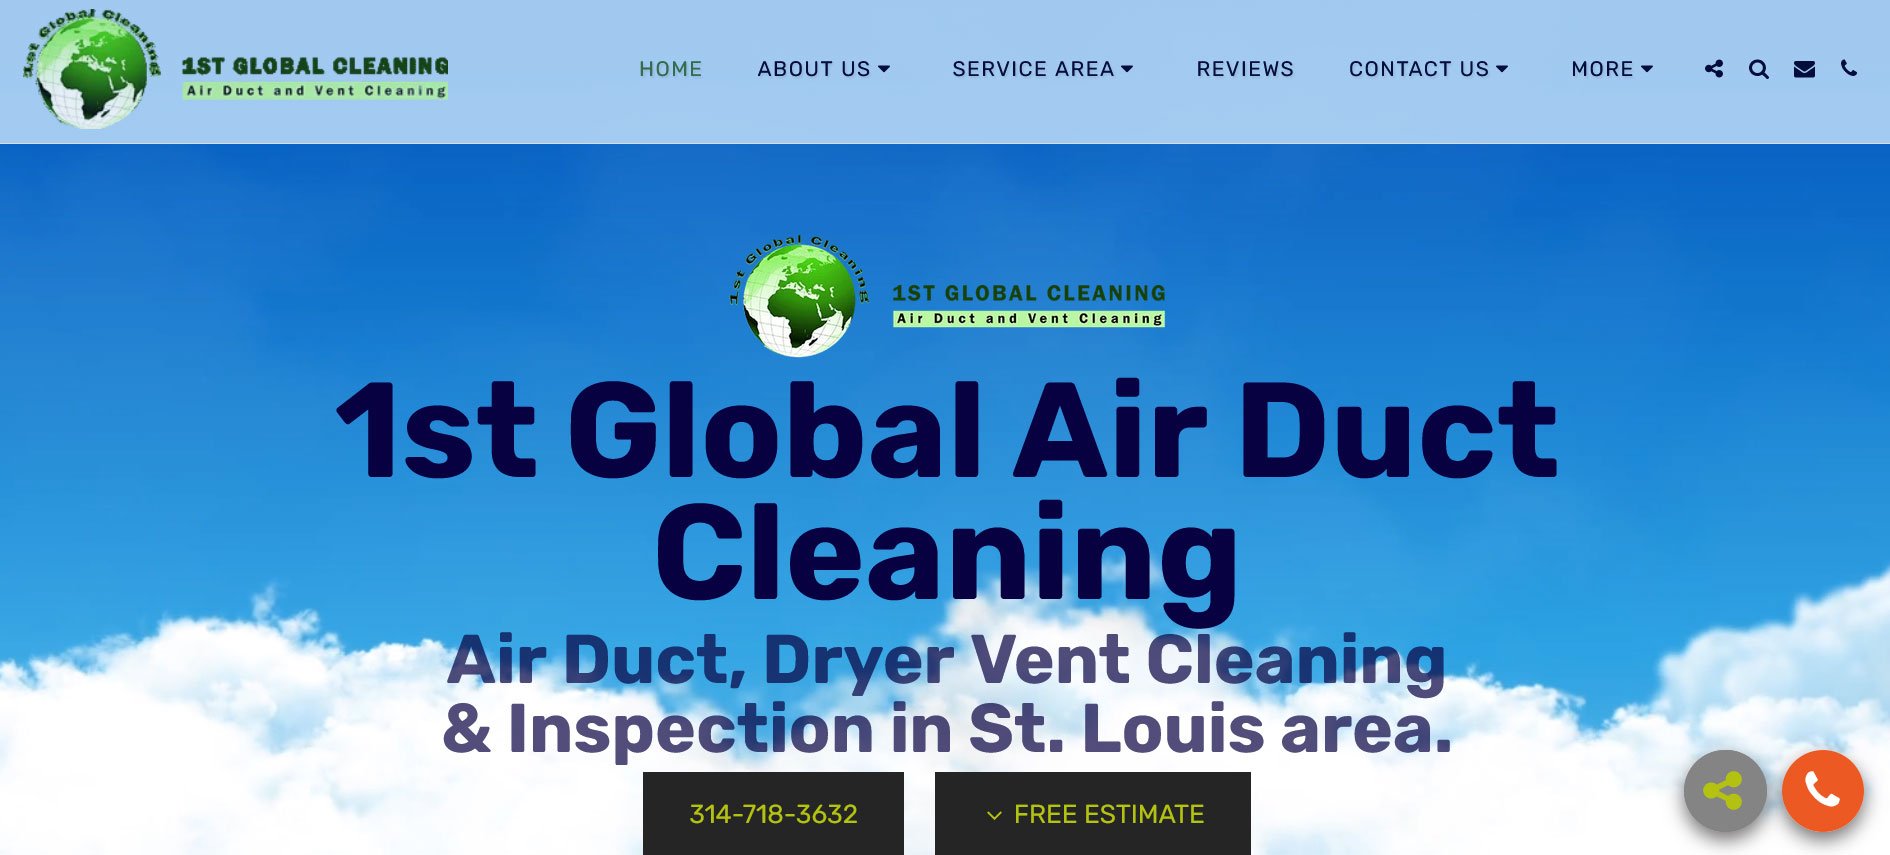 Gobal Air Duct Cleaning